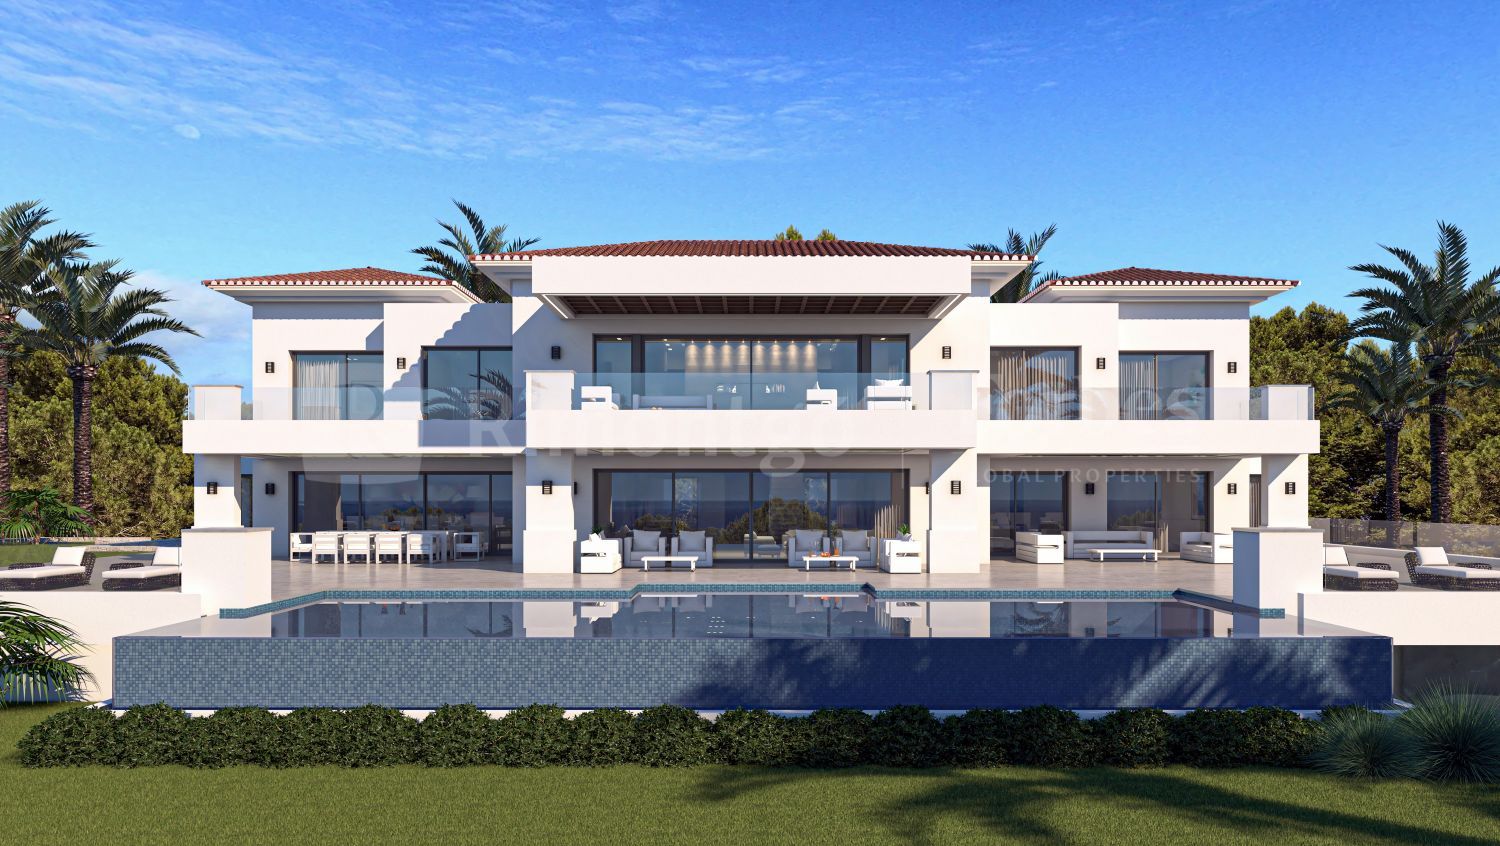 Villa under construction project for sale in Les Rotes, Dénia.